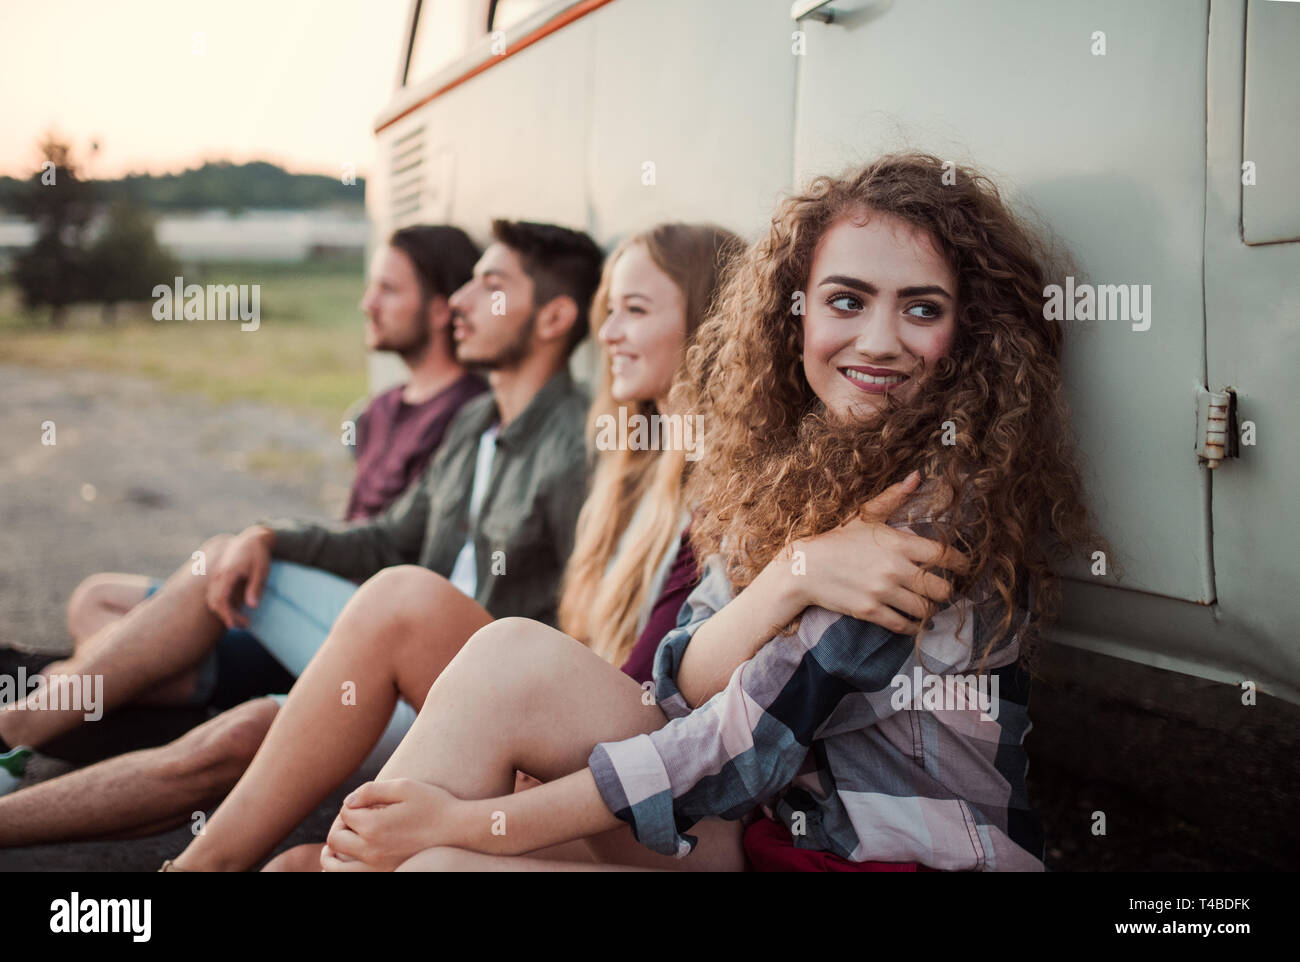 A group of young friends on a roadtrip through countryside, sitting by a minivan. Stock Photo